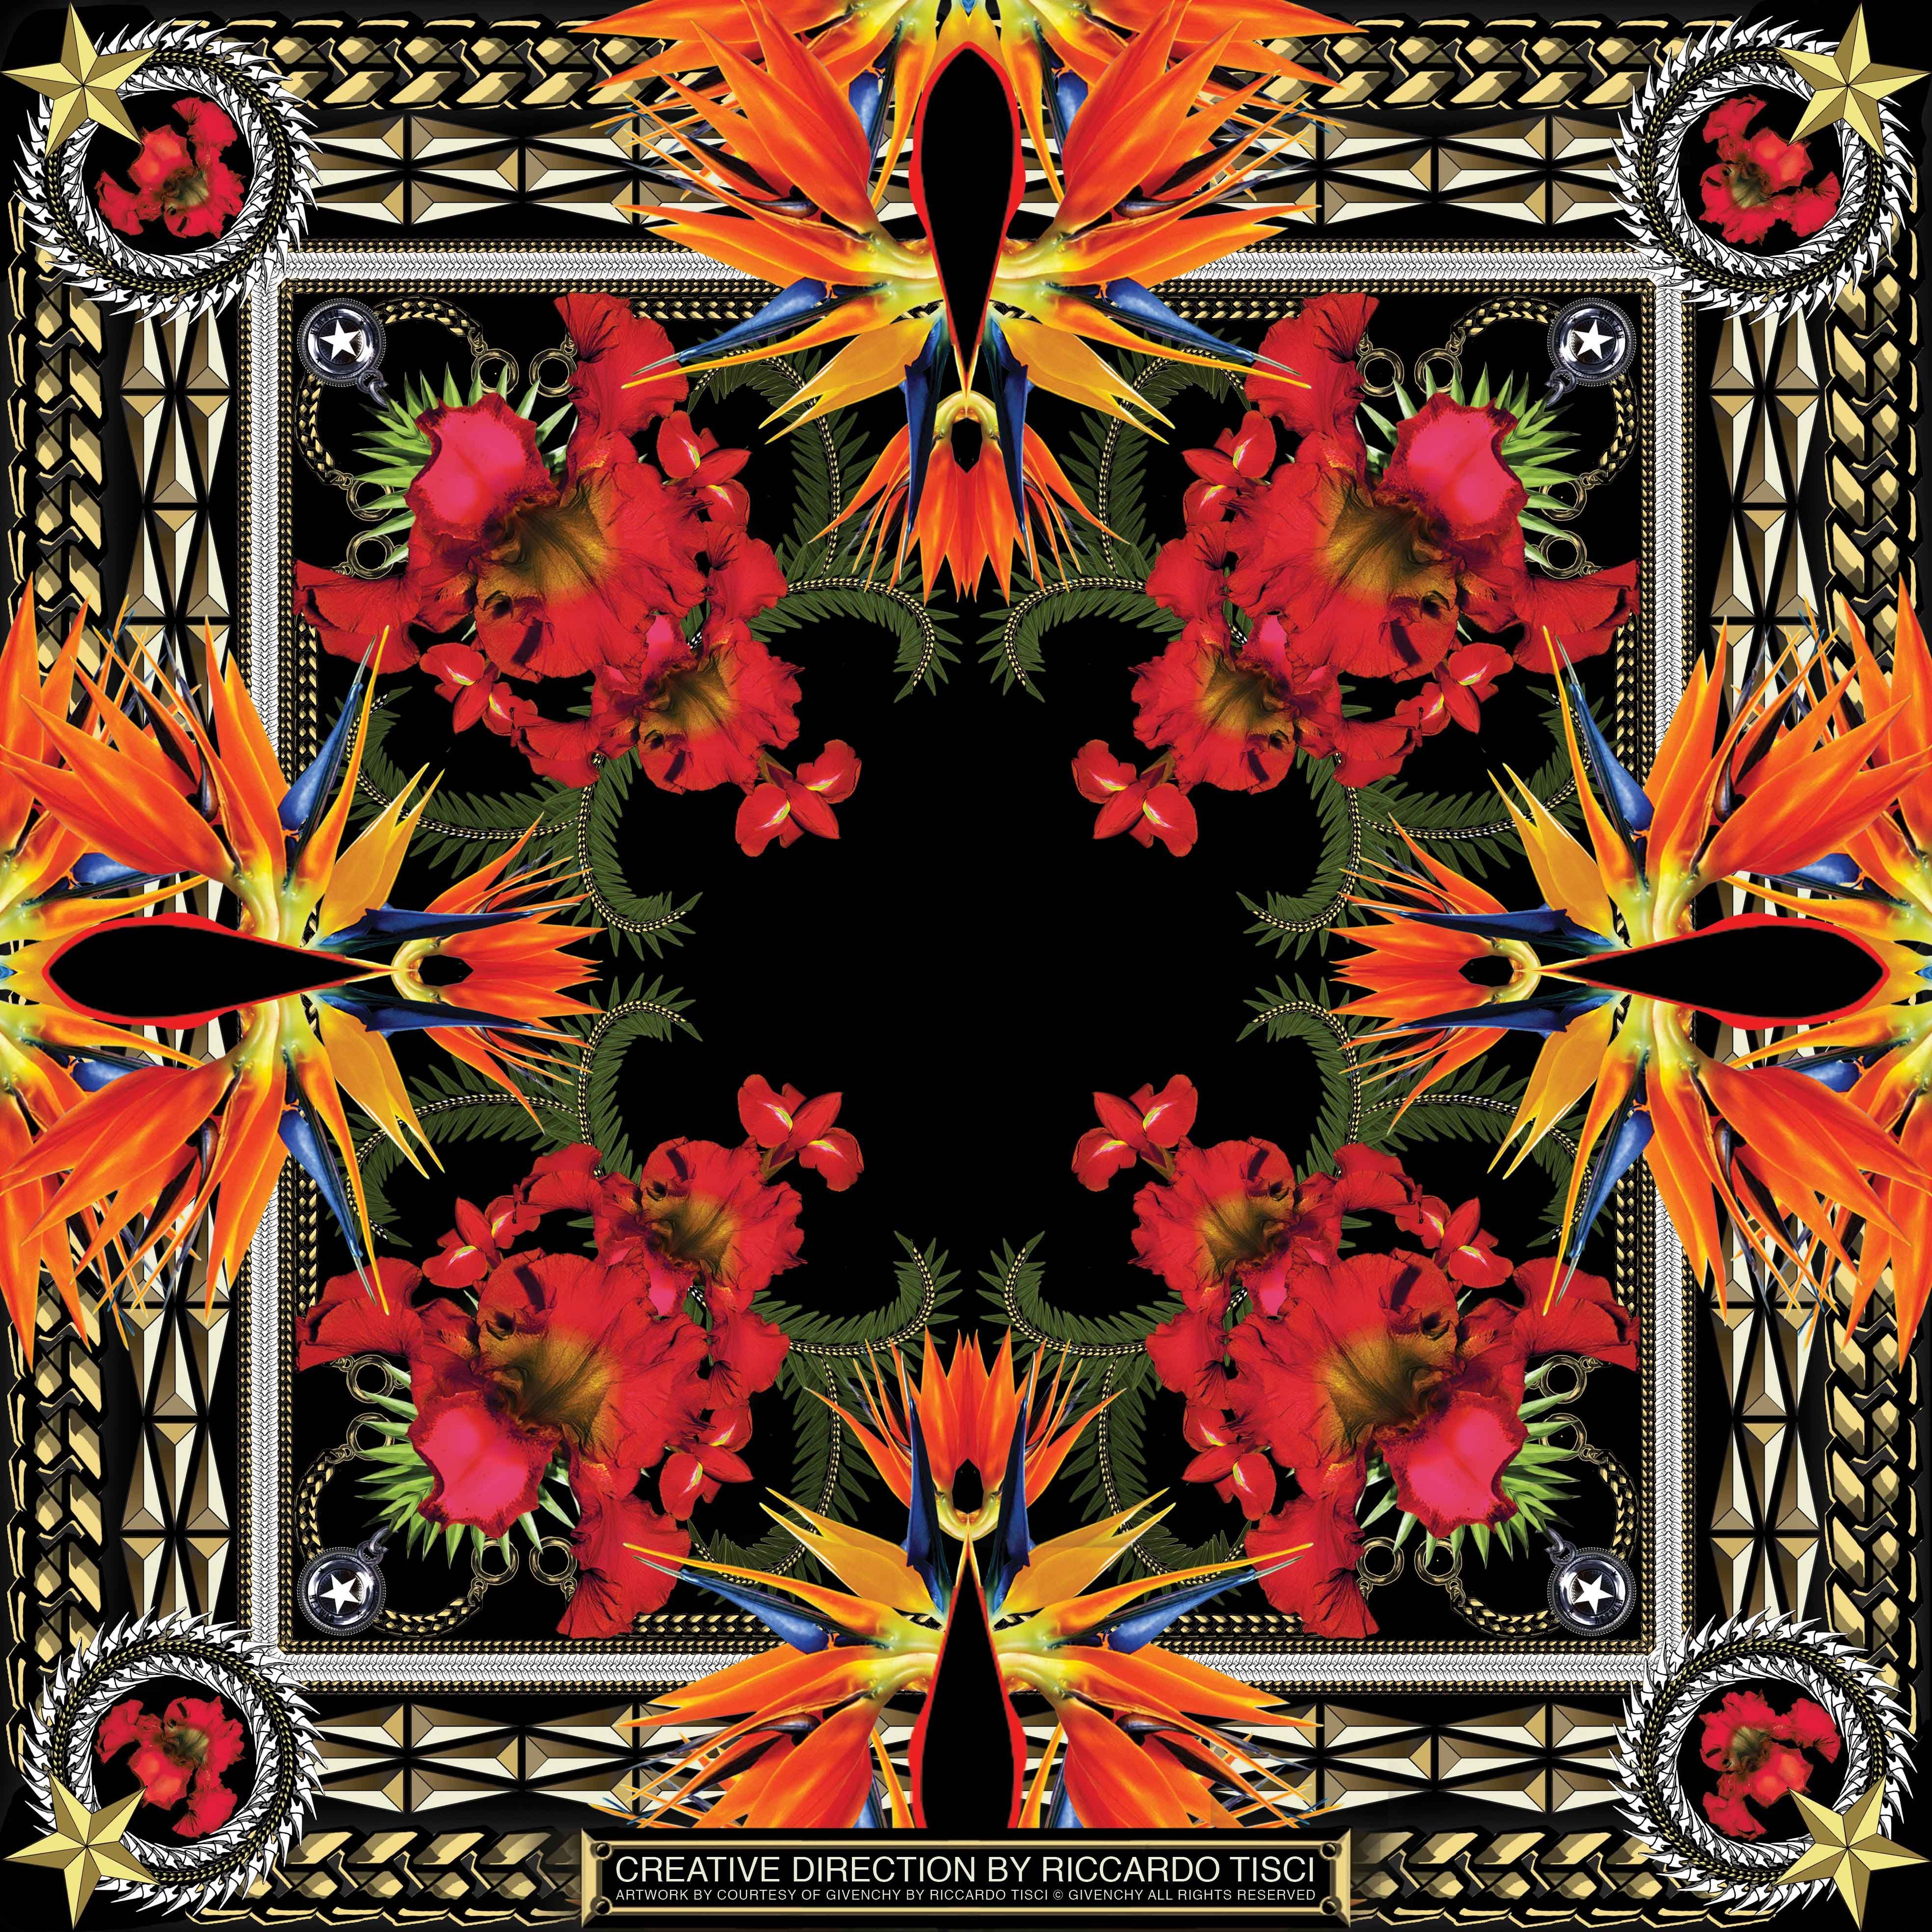 Riccardo Tisci of Givenchy Designs Artwork for “Watch the Throne” Album. Artwork, Art, Abstract